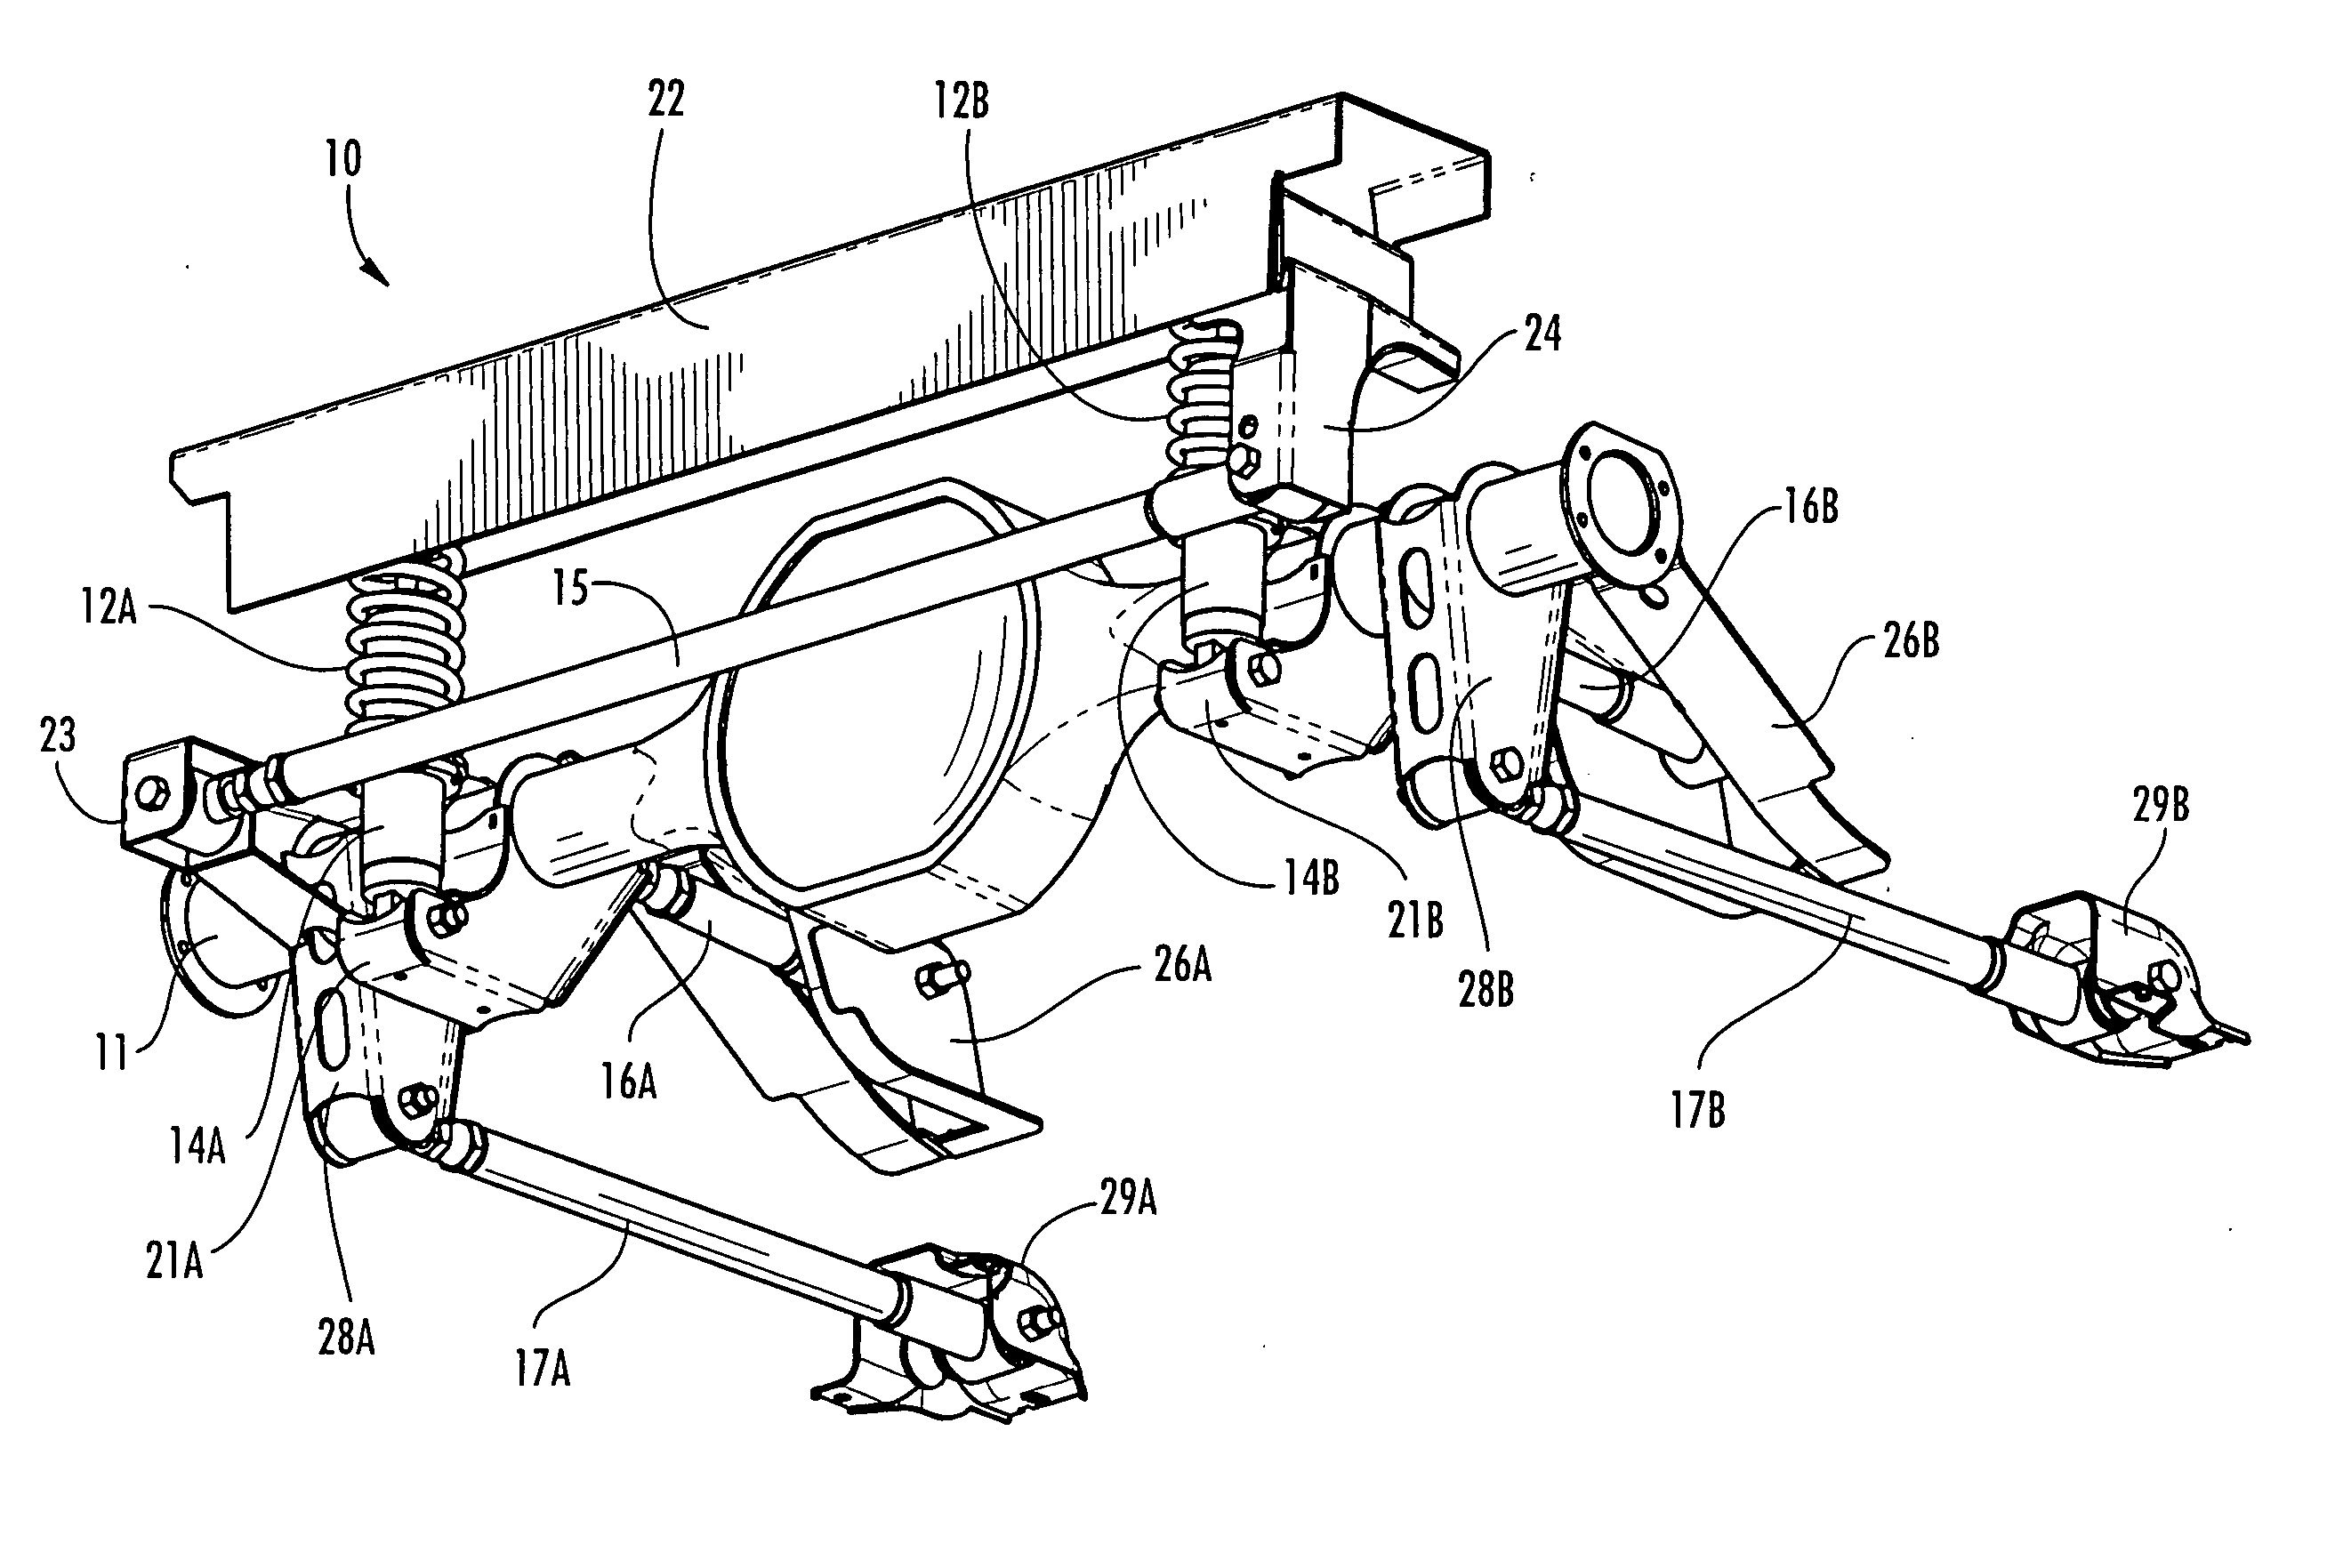 Vehicle suspension system incorporating swivel link assembly